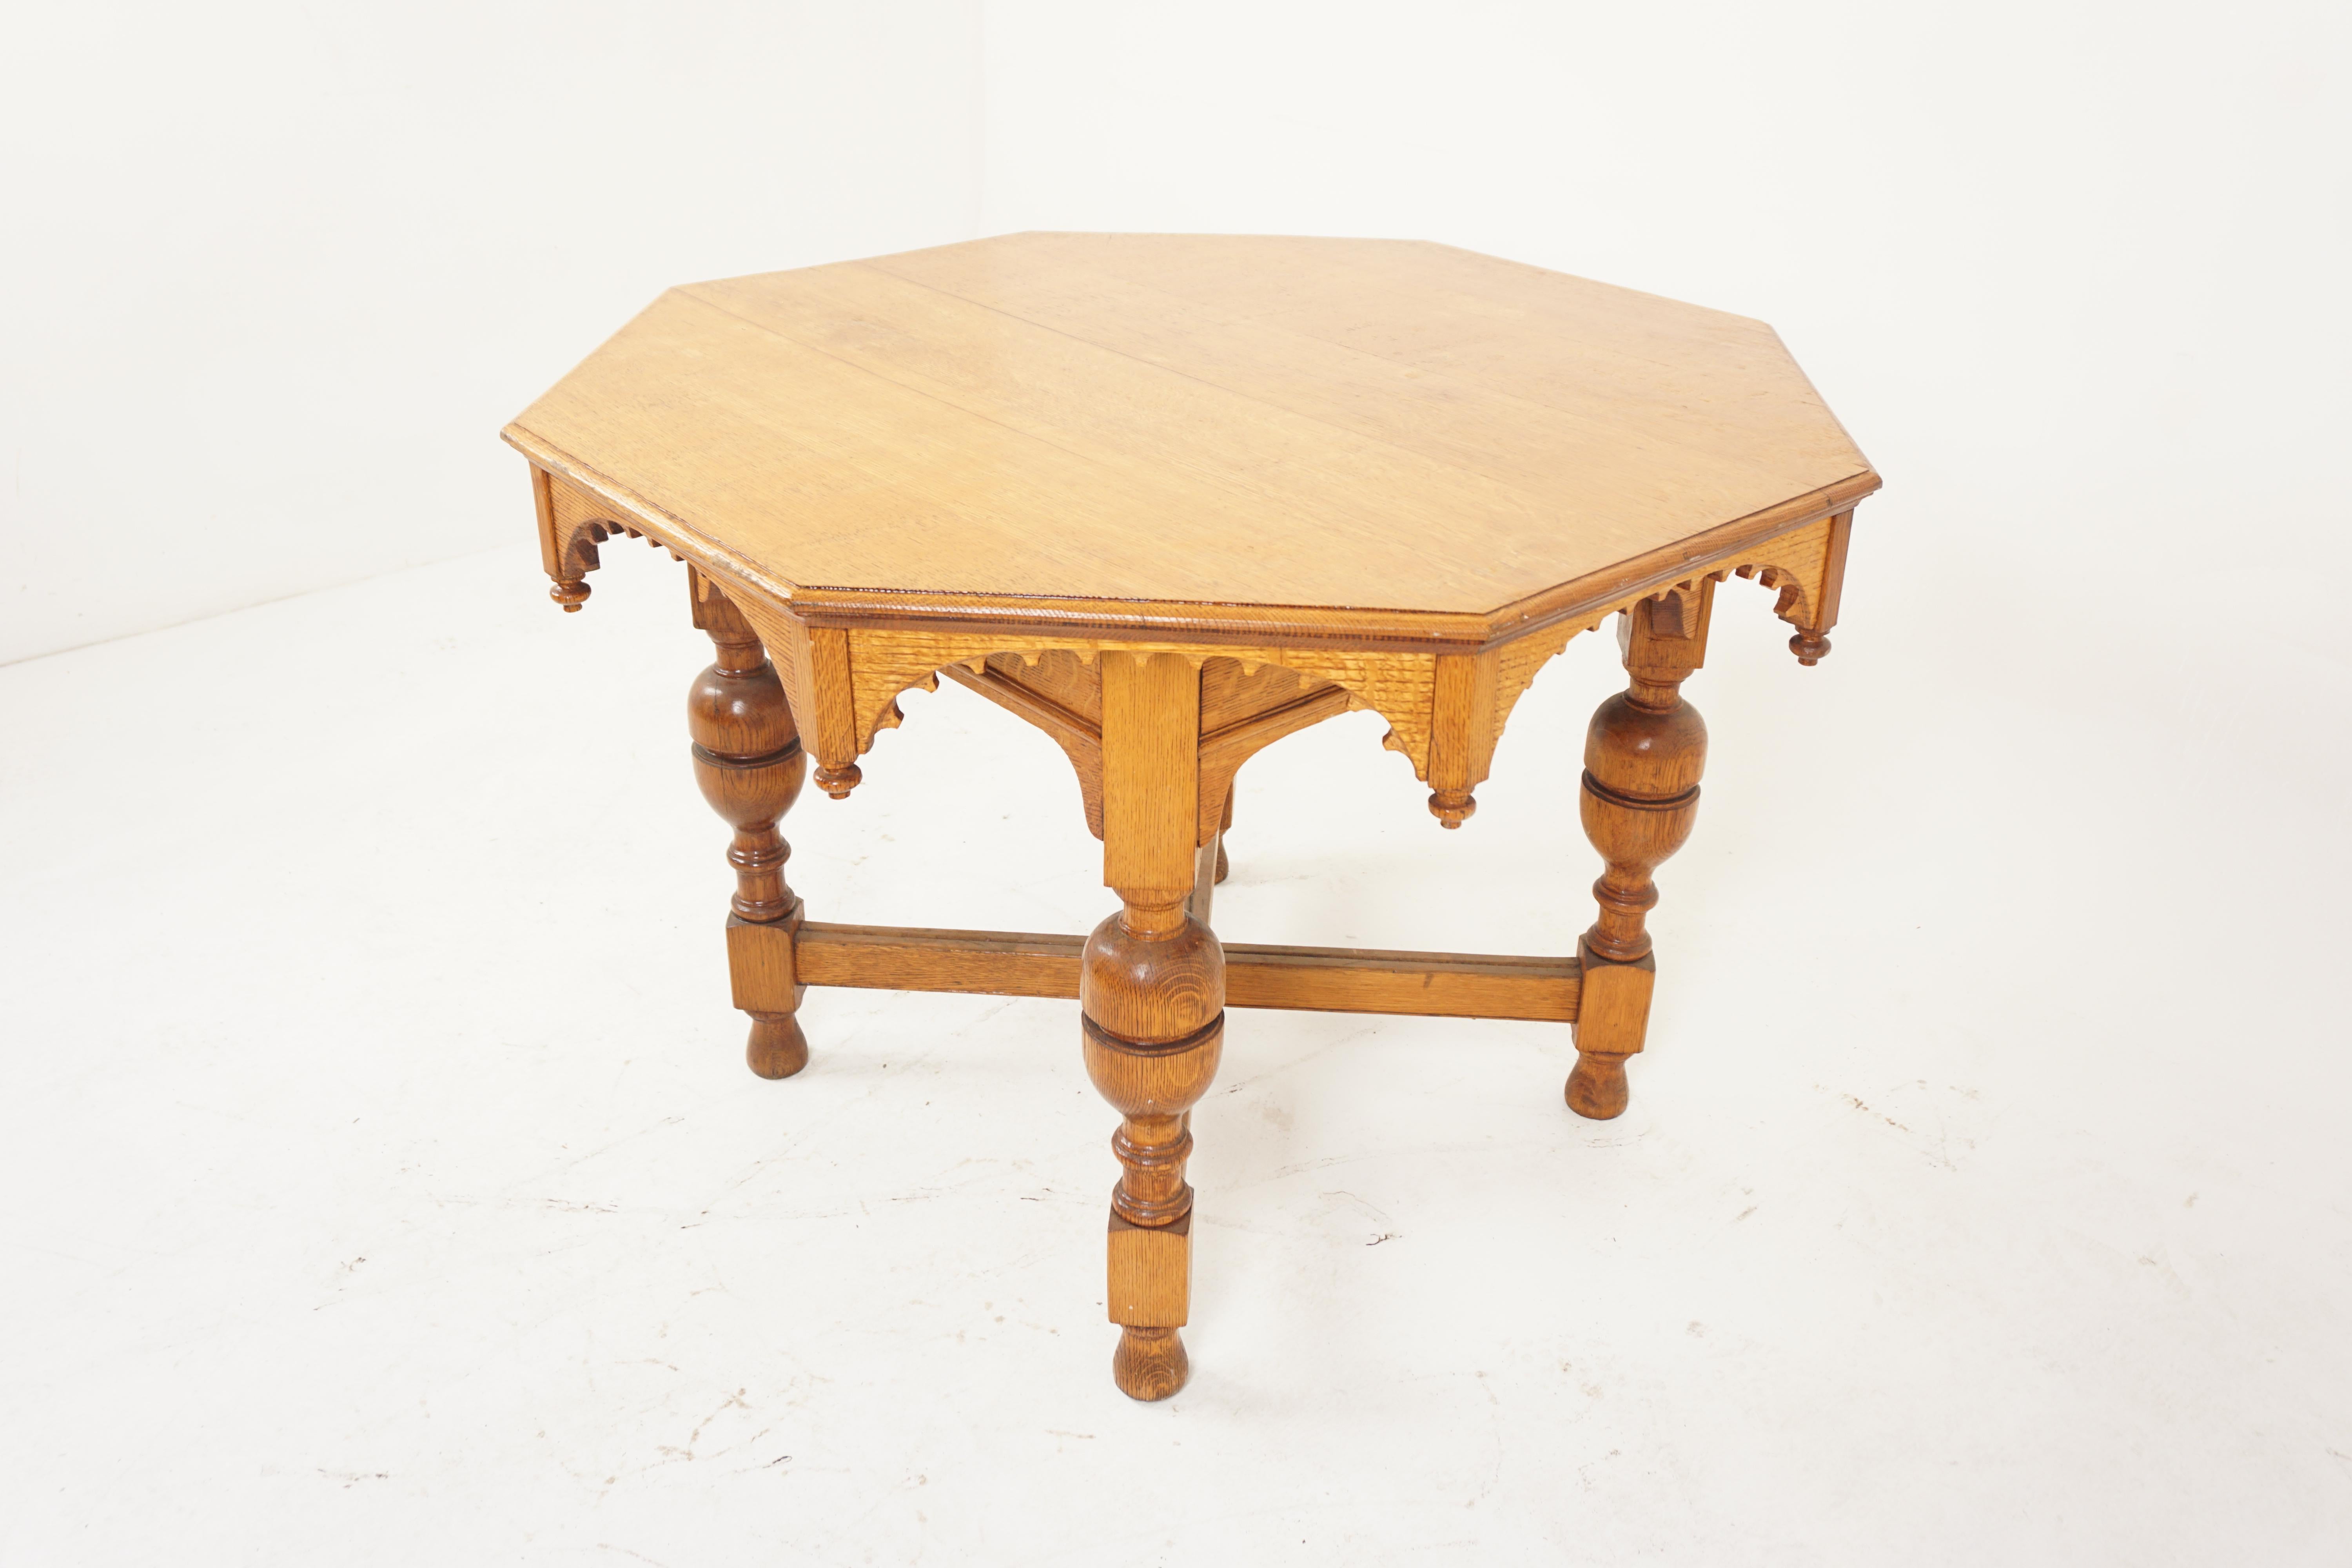 Ant. Victorian Arts + Crafts Oak Octagonal Center Table, Scotland 1890, H940

Scotland 1890
Solid Oak
Original Finish
Features an octagonal shaped top with moulded edge
With turned bulbous shaped legs on a framed under tier
Nice golden oak